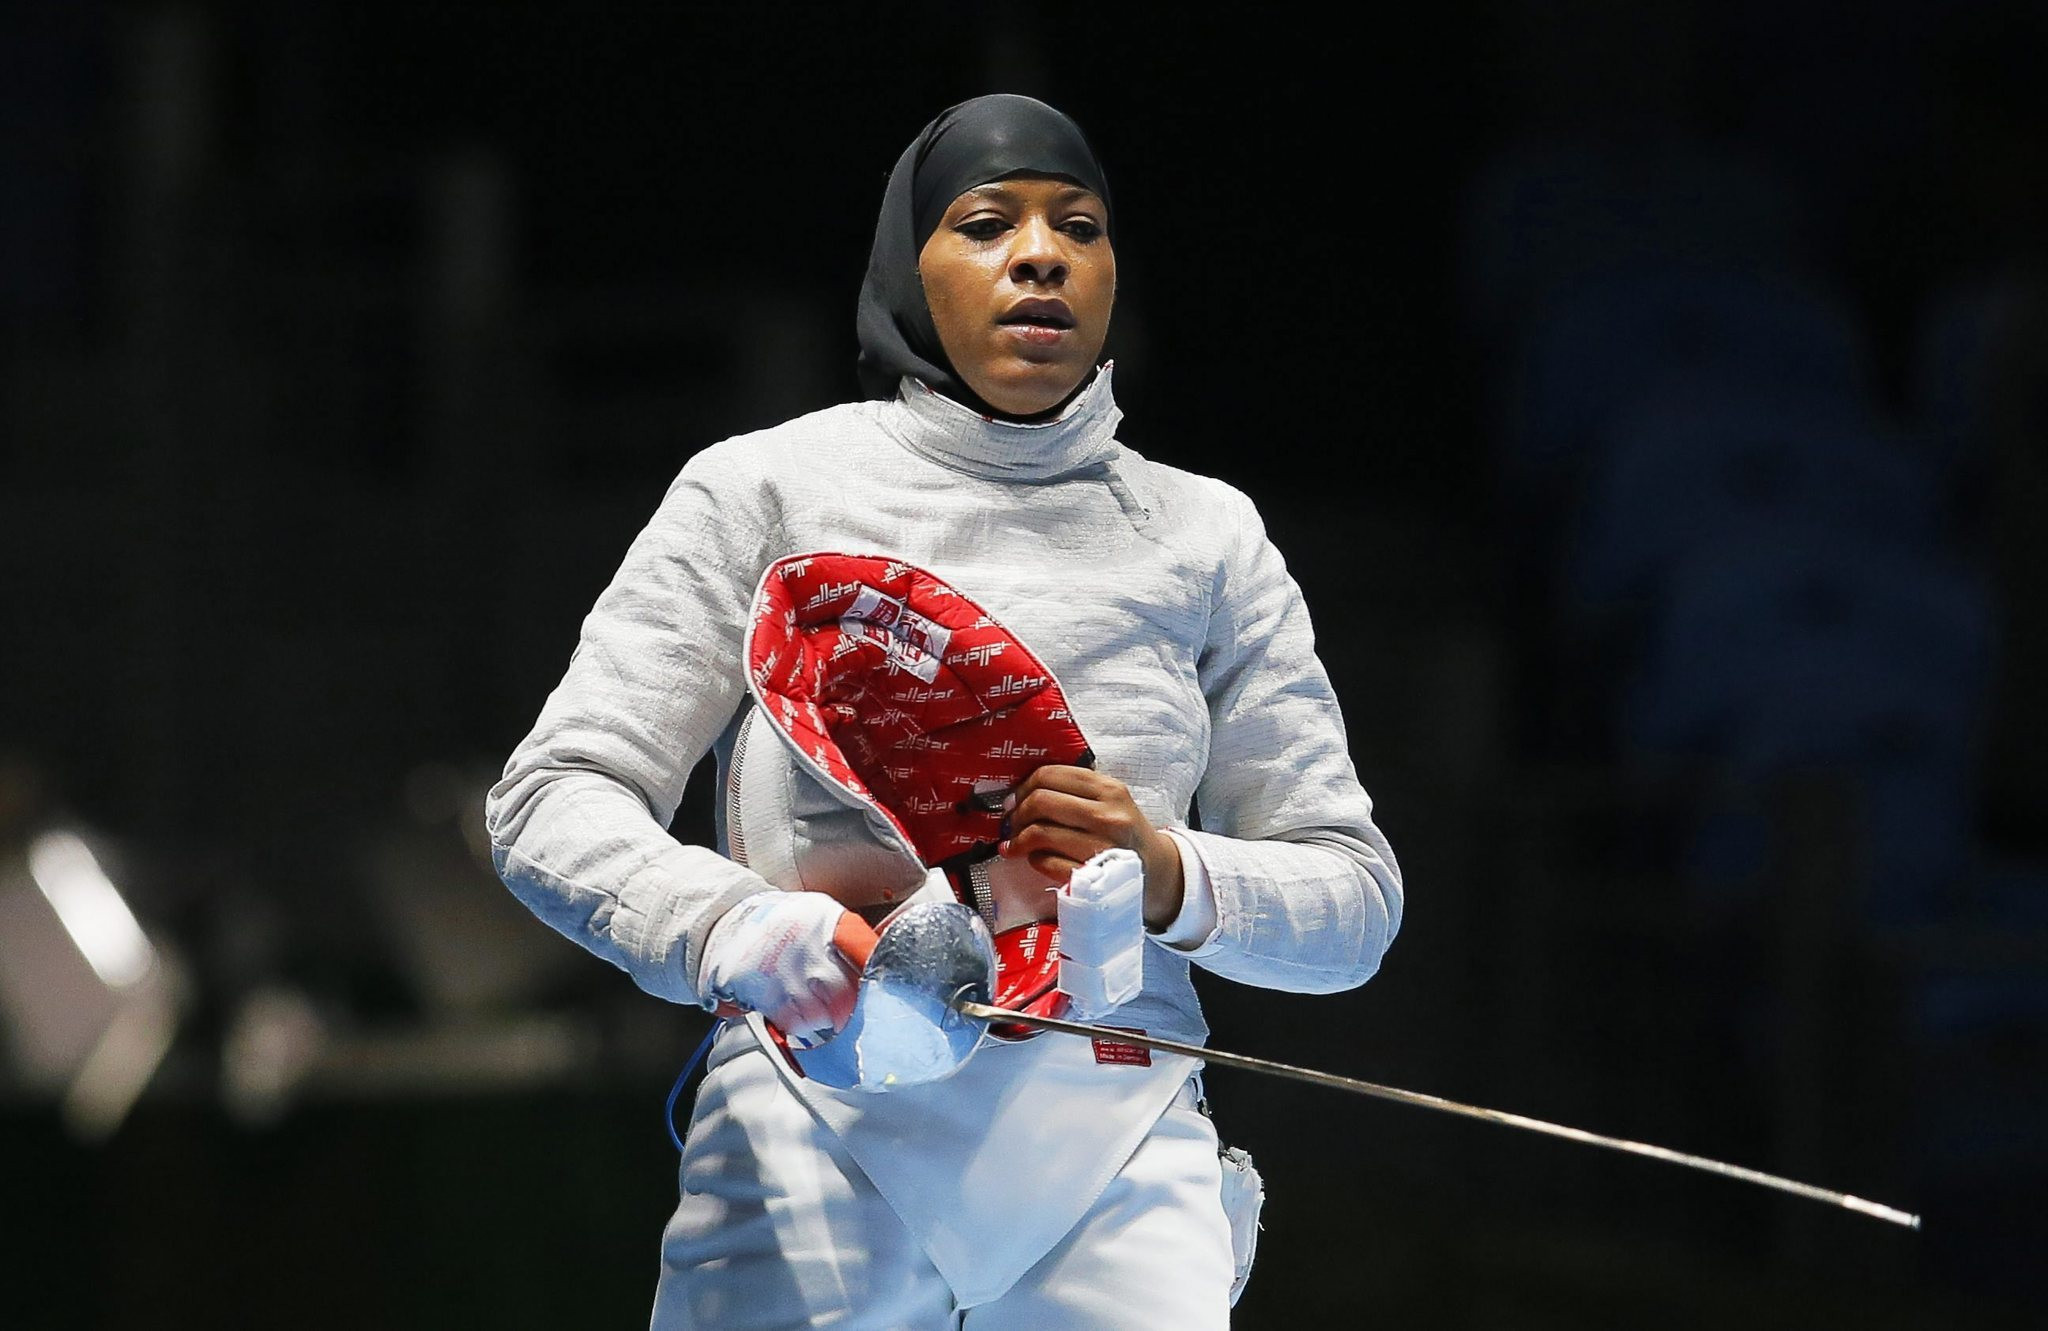 American fencer Ibtihaj Muhammad competed for the United States at the 2016 Olympic Games in Rio de Janeiro while wearing a hijab, something several other Muslim women in the future are set to follow ©Getty Images